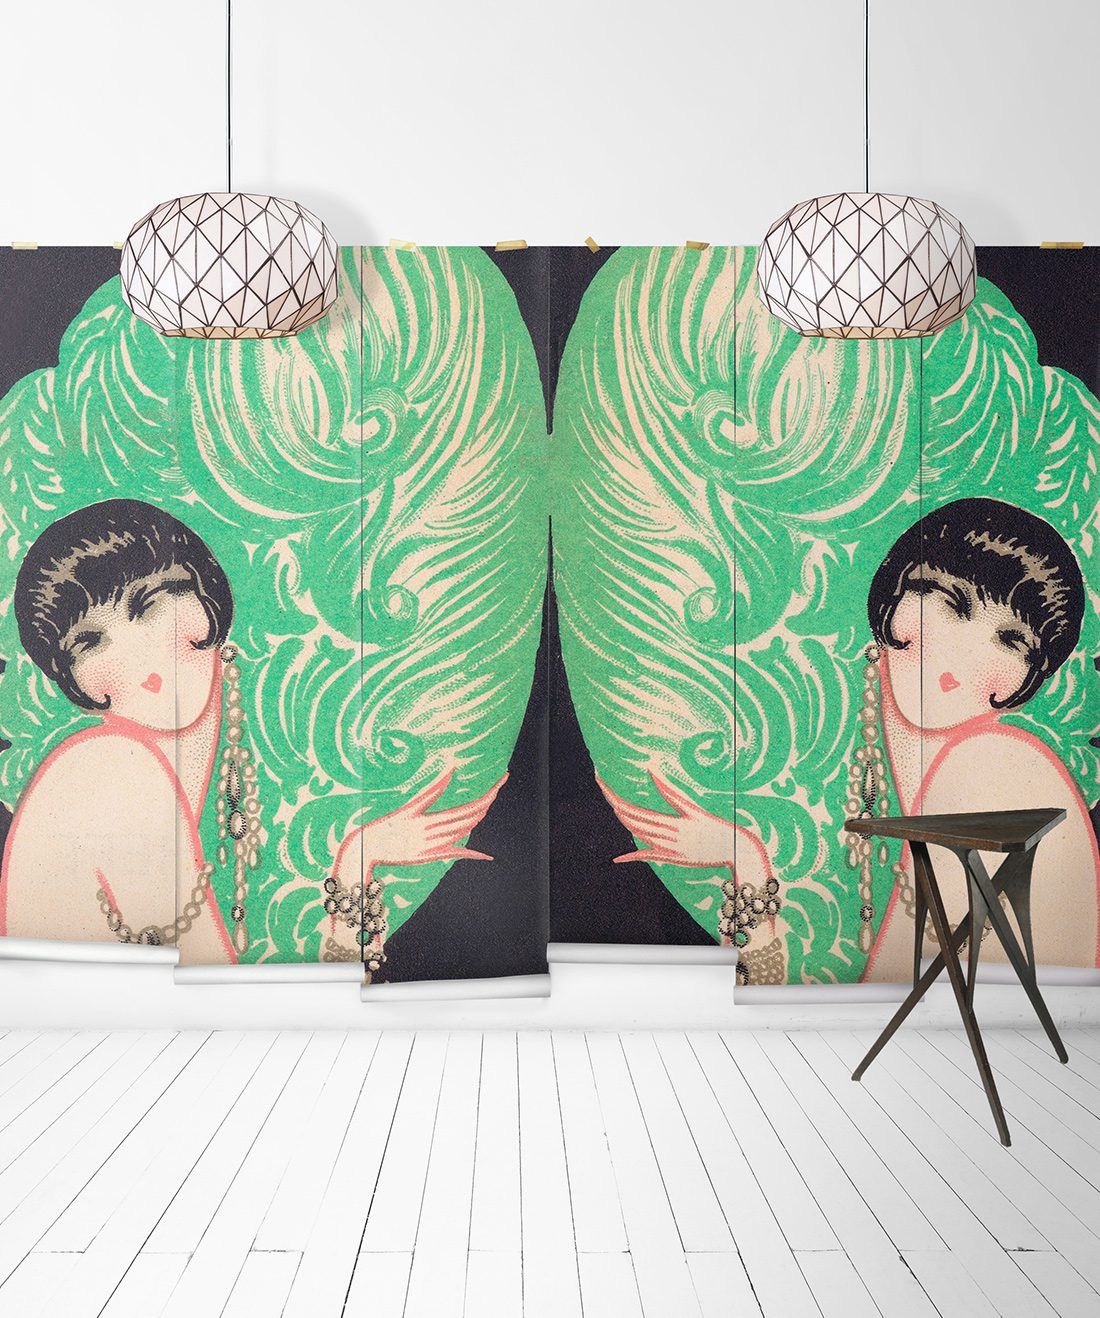 Mirrored Burlesque is a retro wall mural